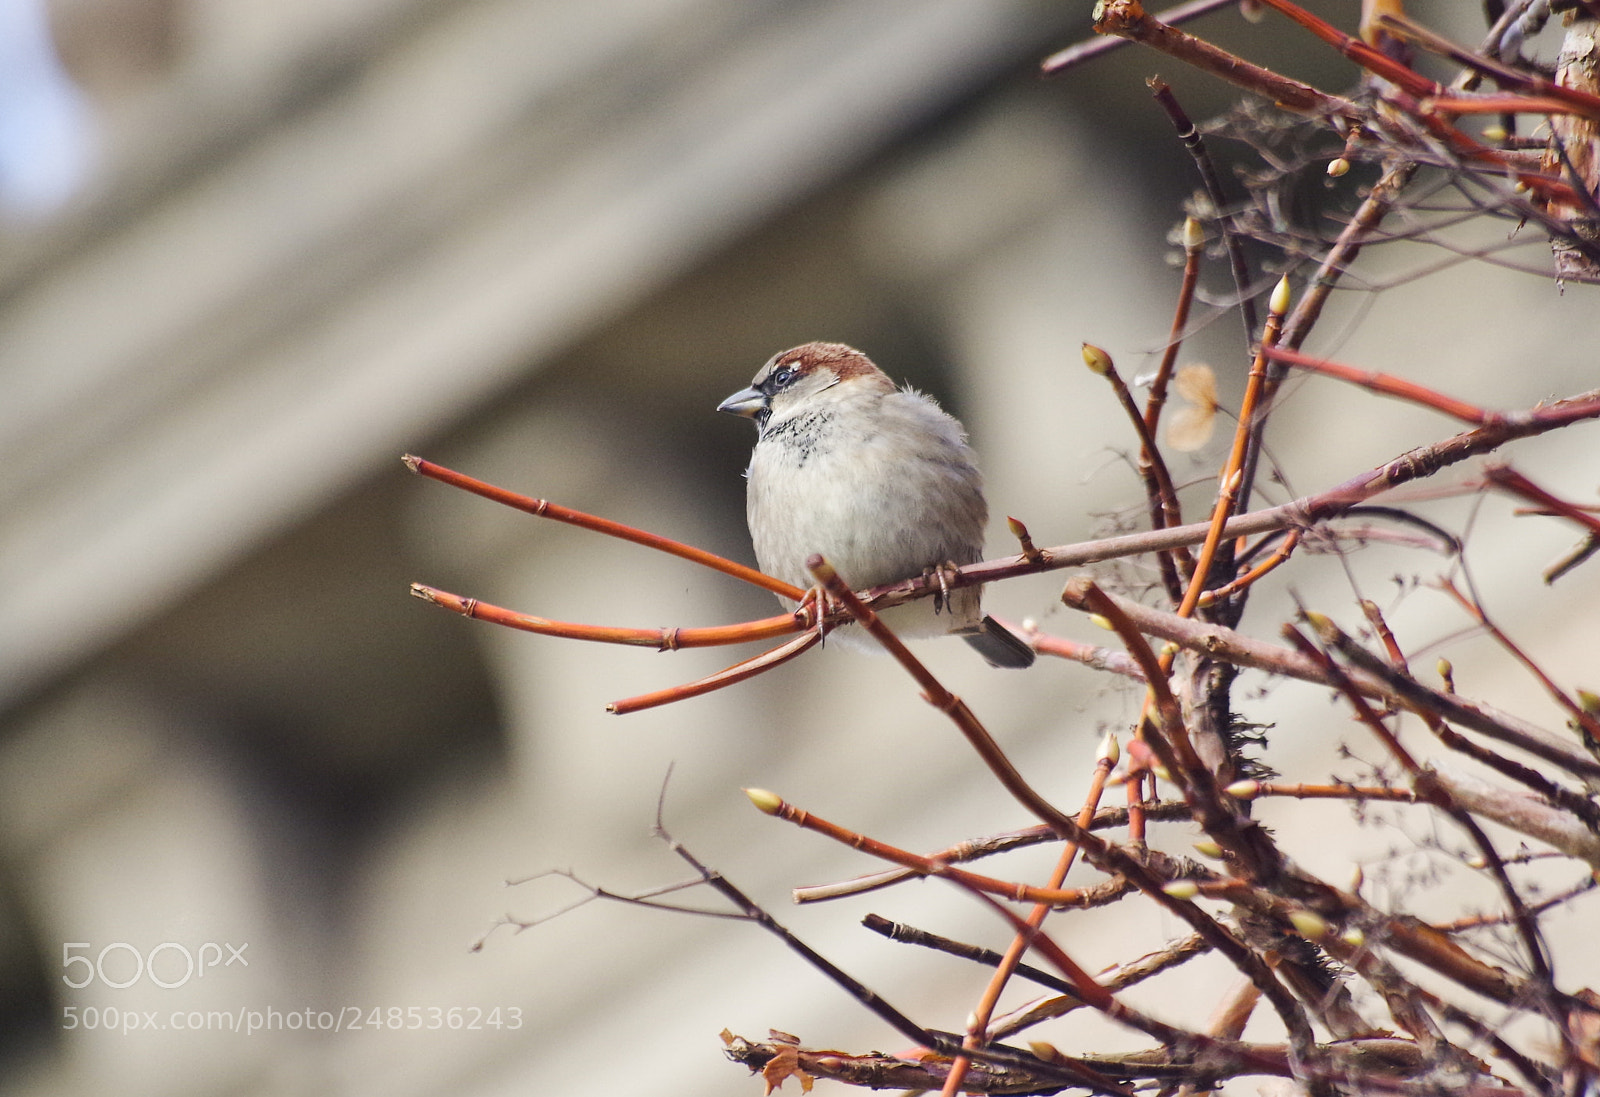 Pentax K-30 sample photo. Another sparrow photography